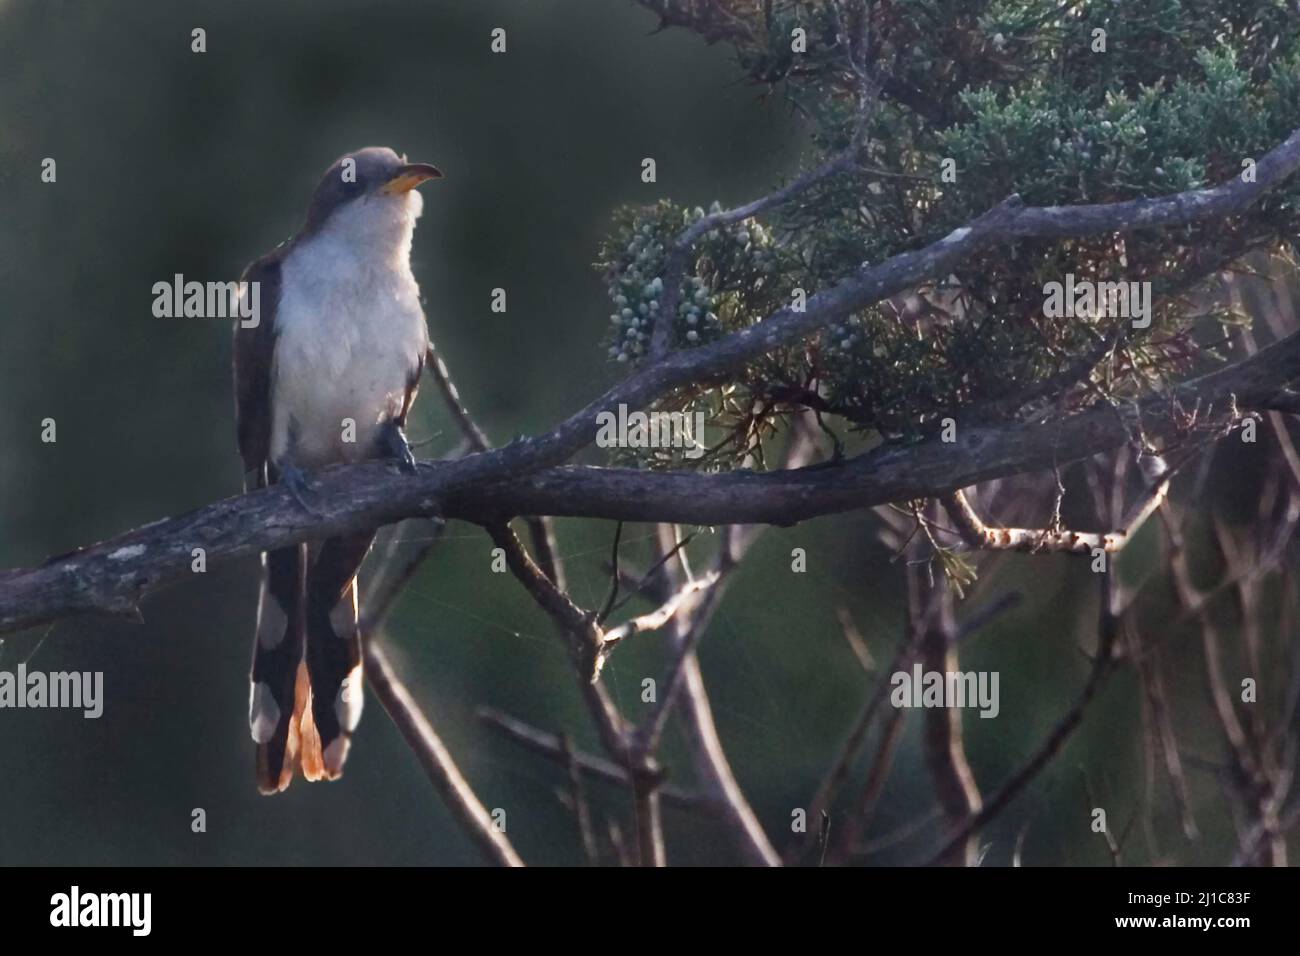 A Yellow-billed Cuckoo, Coccyzus americanus, relaxed on a perch Stock Photo